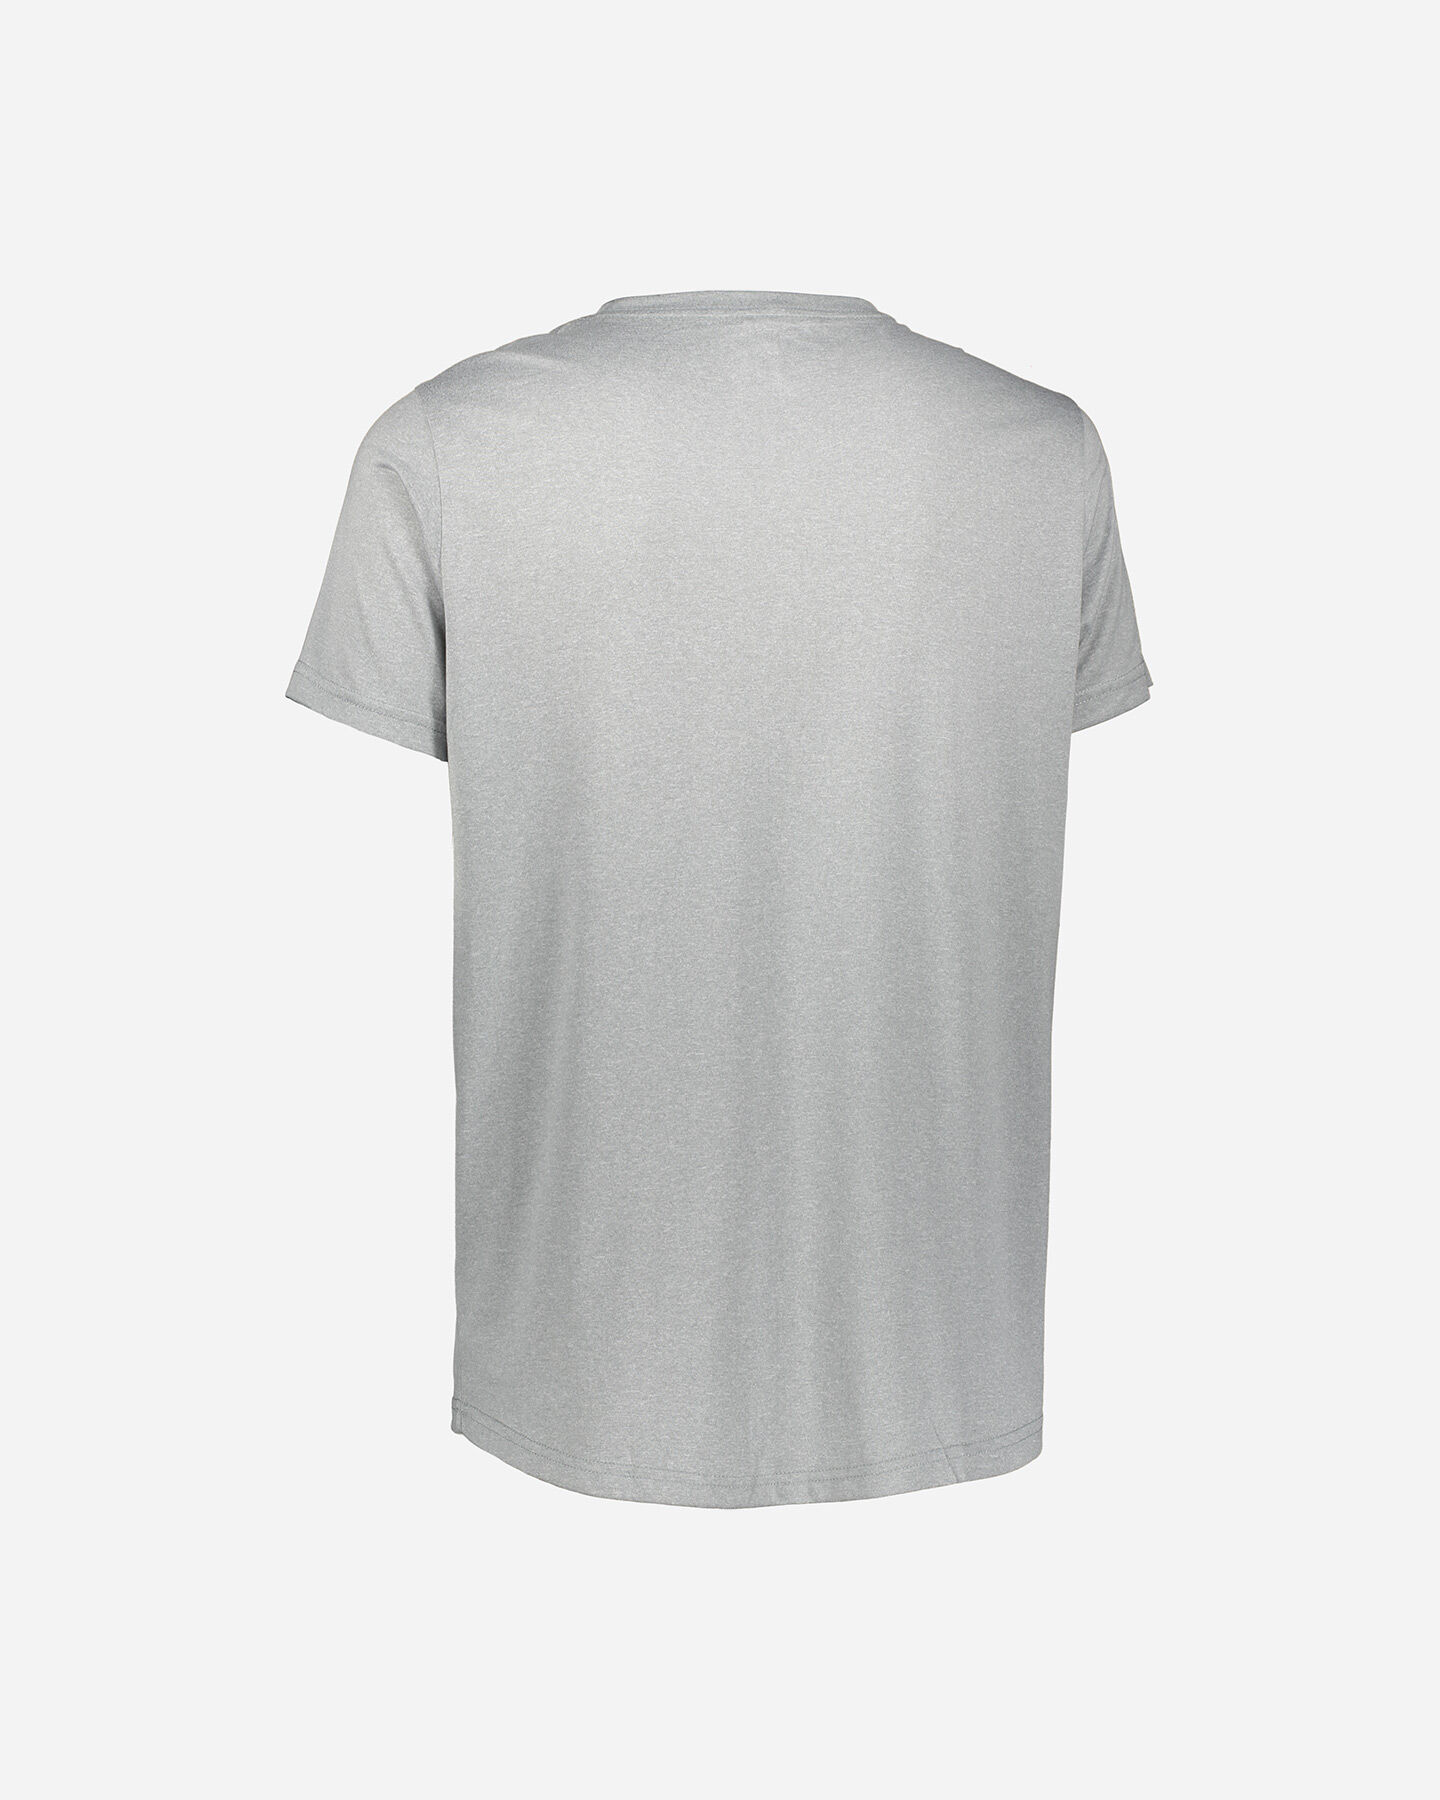  T-Shirt THE NORTH FACE REAXION AMP M S5292480|X8A|S scatto 1